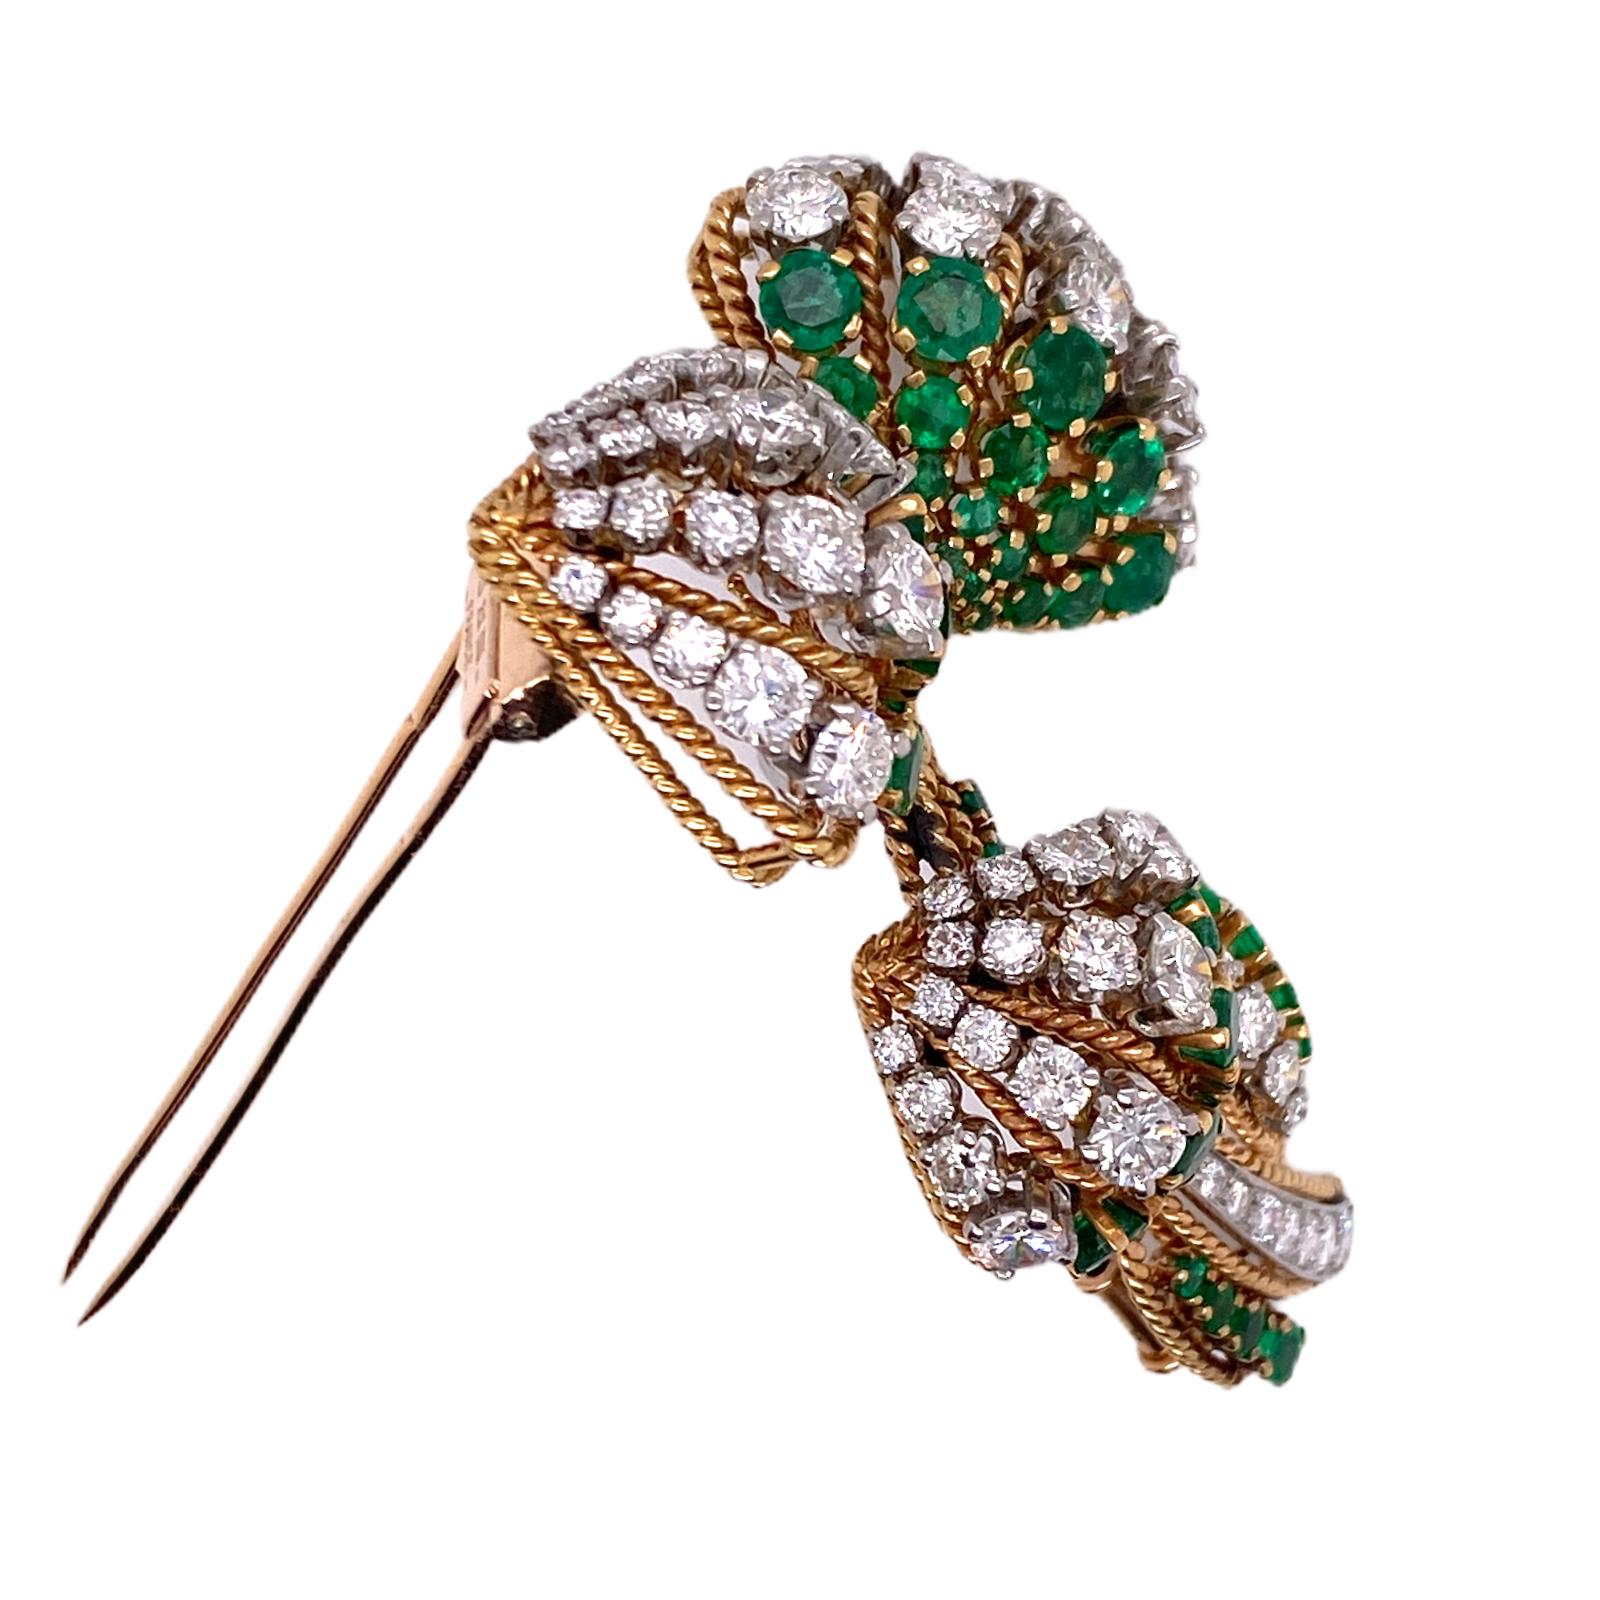 Gorgeous French diamond and emerald brooch fashioned in 18 karat yellow gold and platinum. The pin features 76 round brilliant cut diamonds weighing approximately 8.00 carat total weight and graded F-H color and VS clarity. In addition,  the brooch